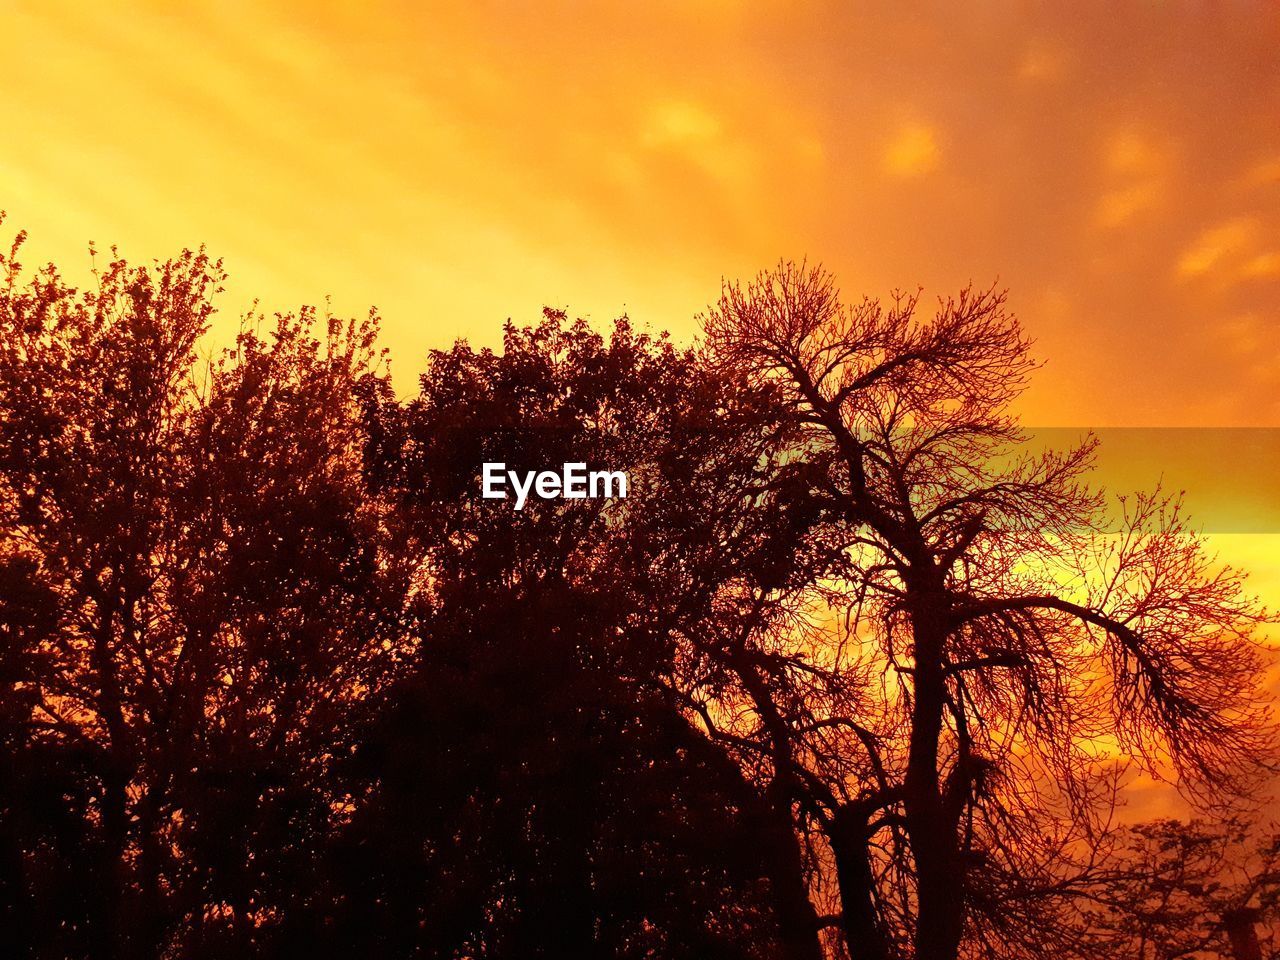 LOW ANGLE VIEW OF SILHOUETTE TREES AGAINST ORANGE SKY